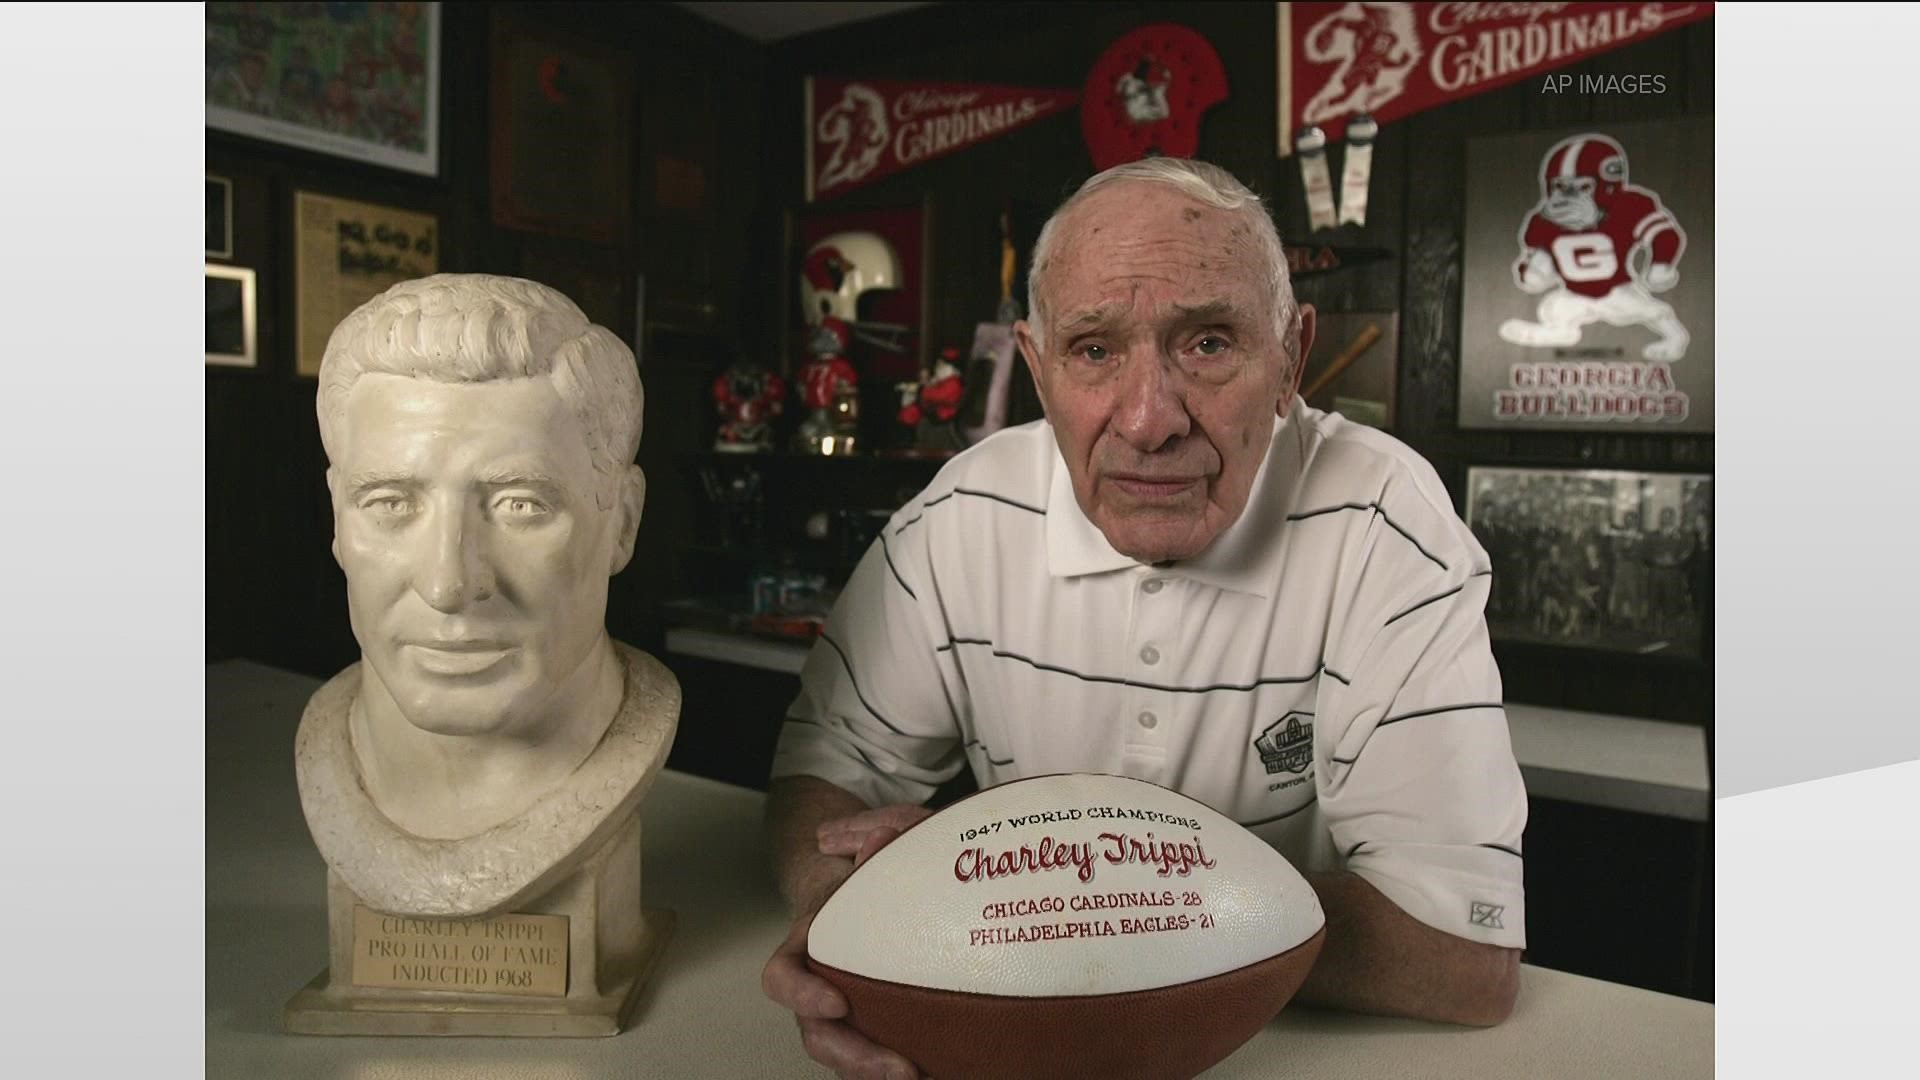 Charley Trippi was 100 years old. He was considered one of the greatest all-around athletes to ever play at Georgia.